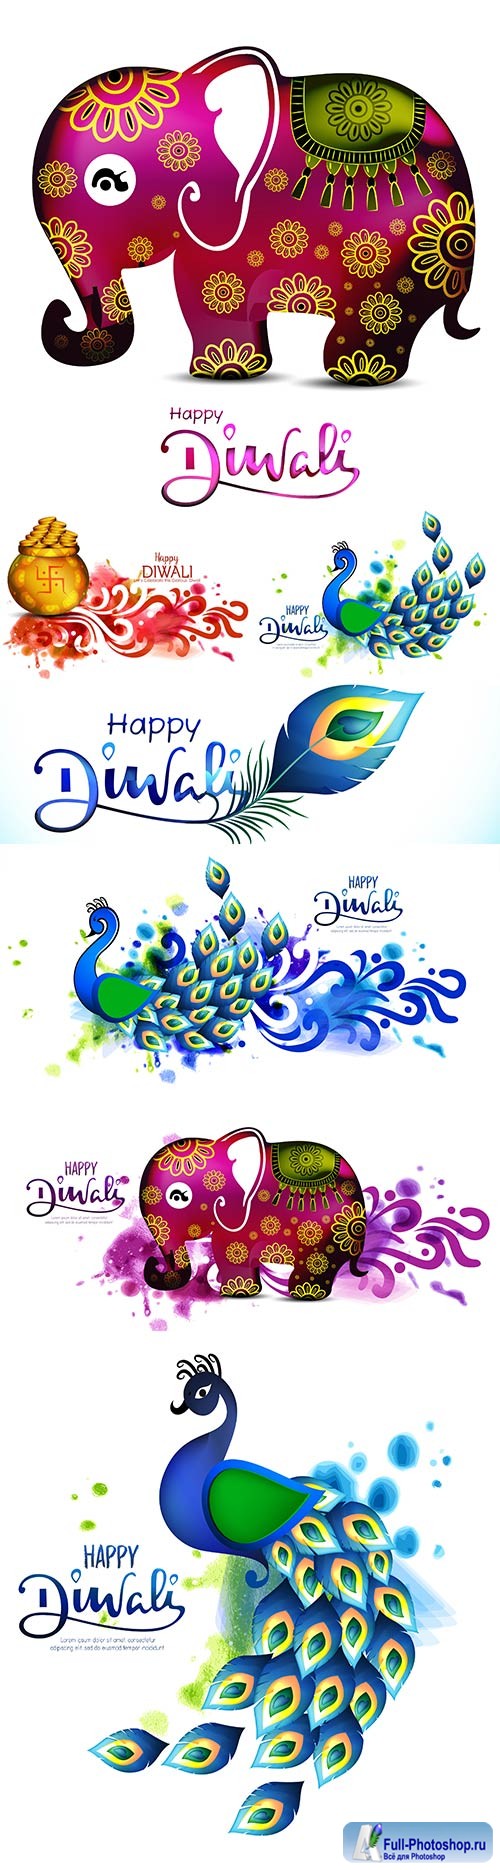 Diwali festival holiday design with peacock with beautiful elephant